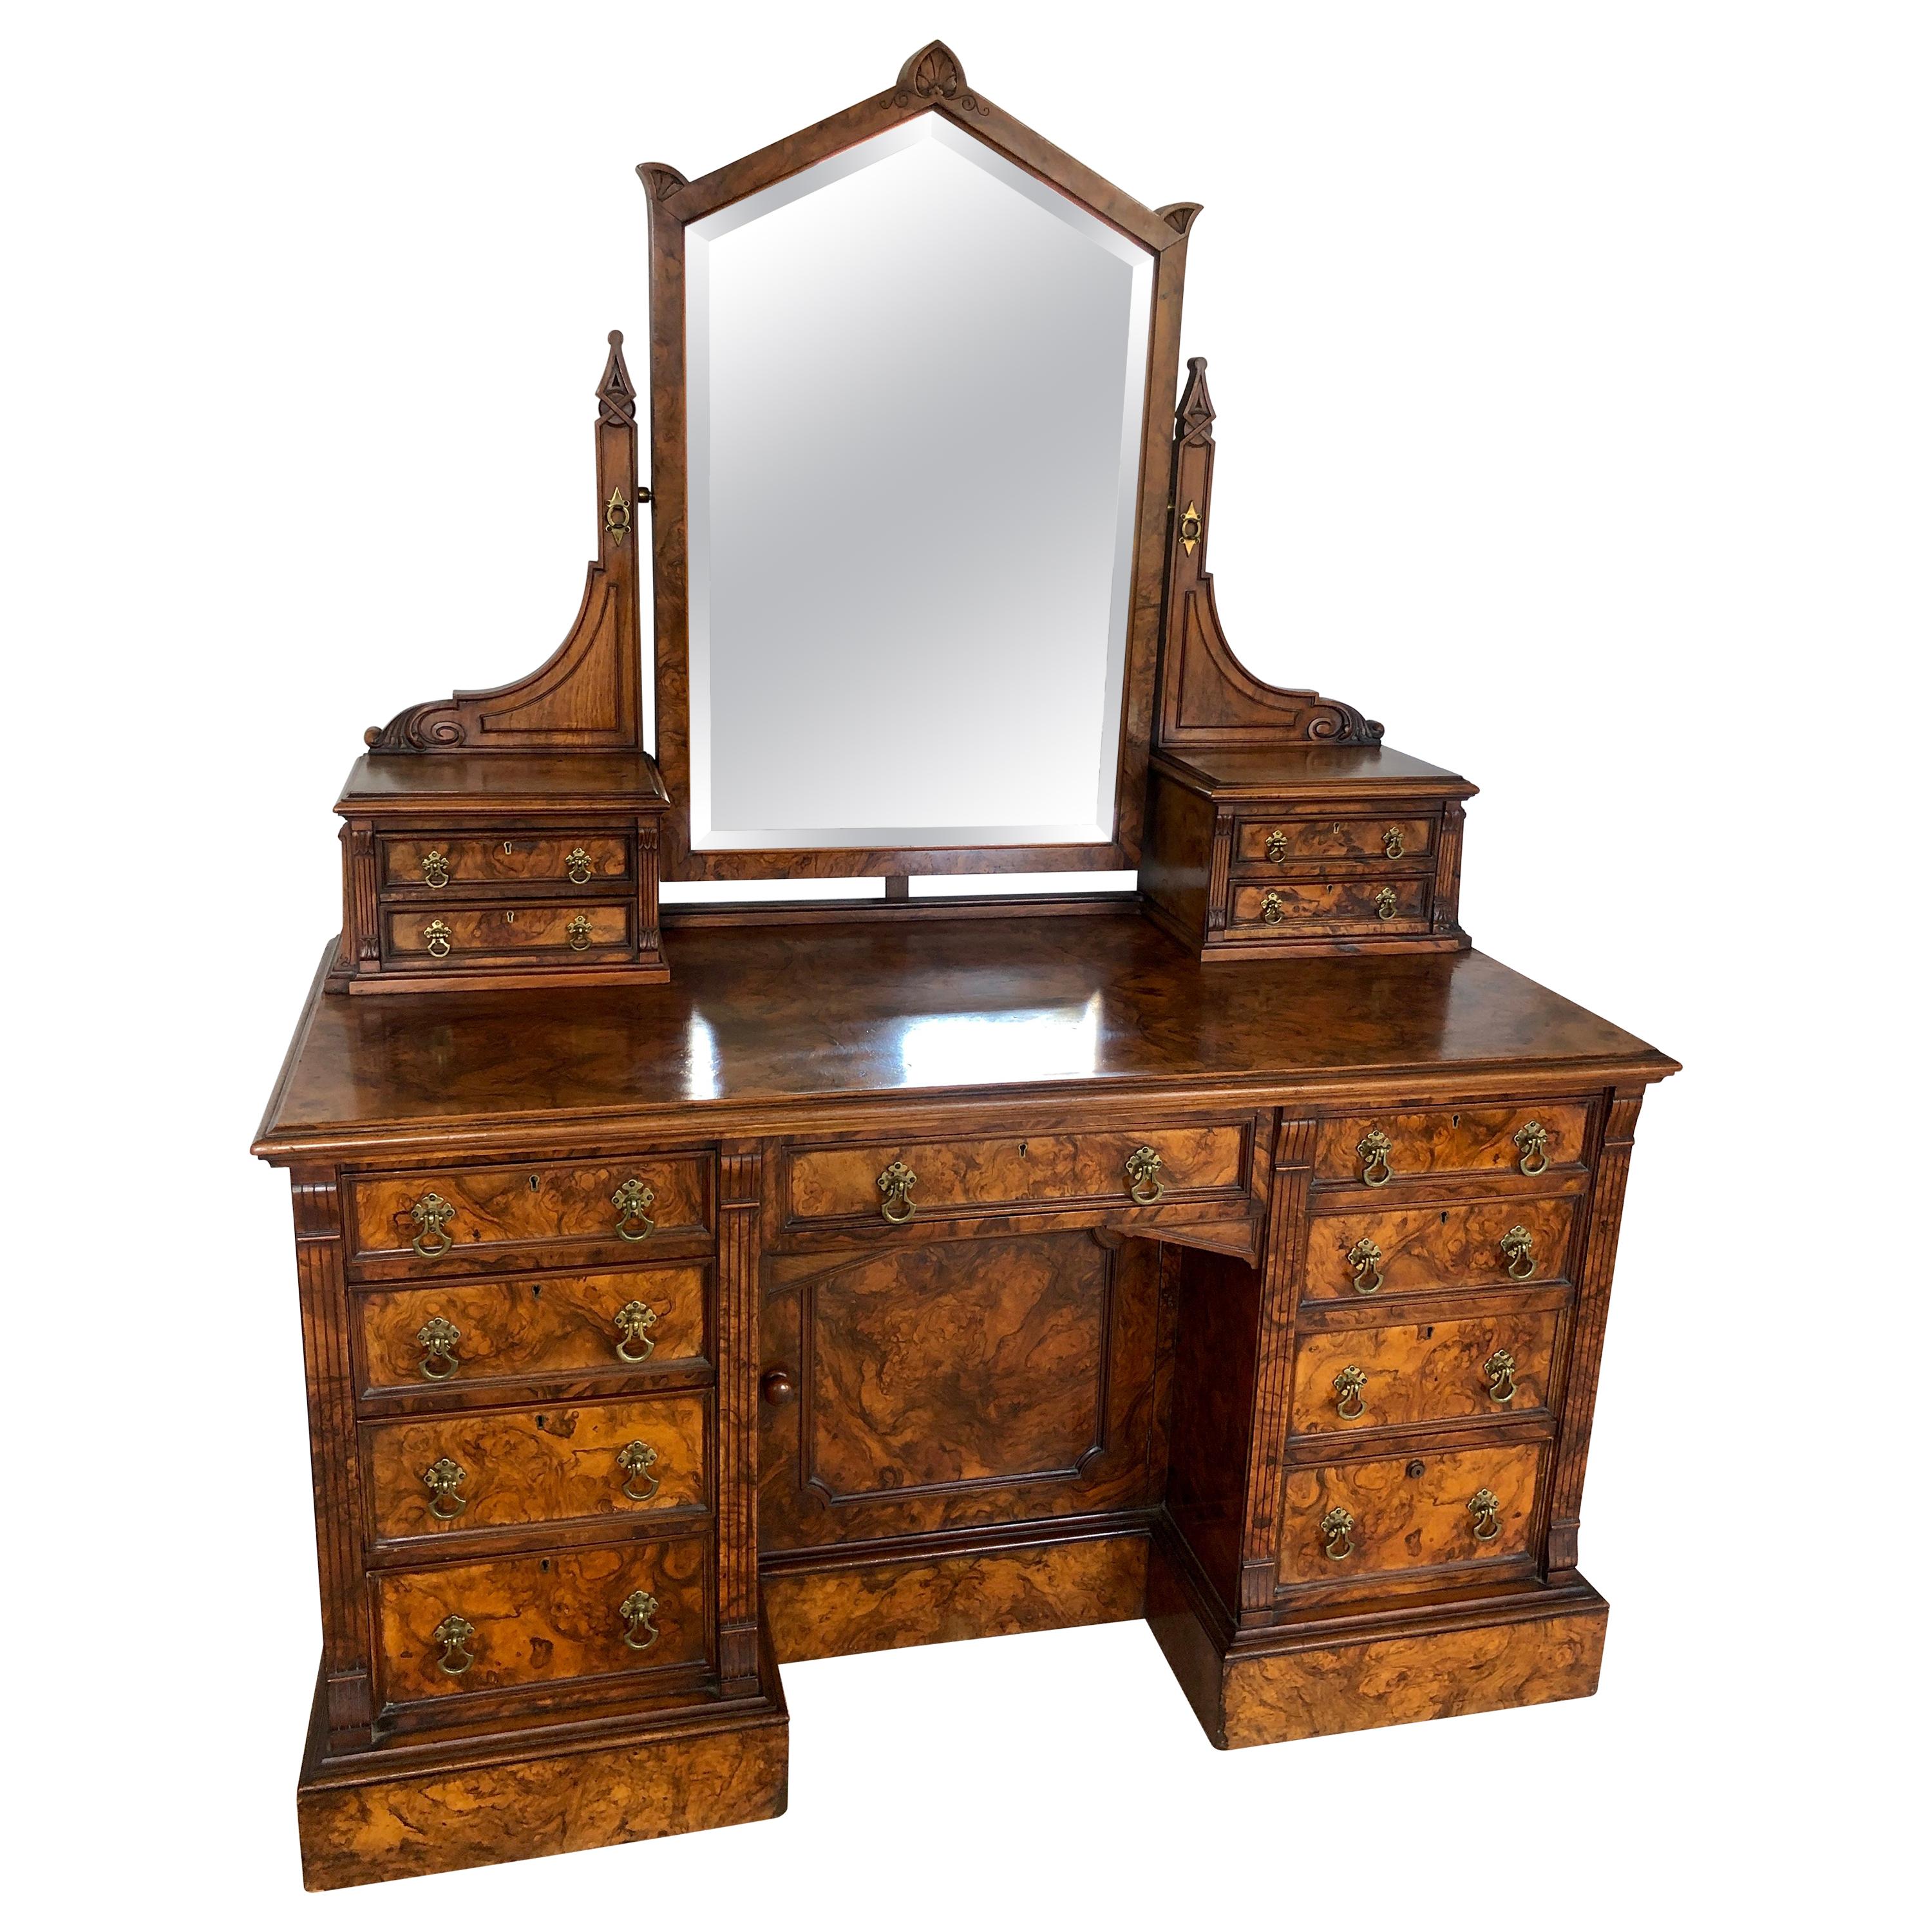 Antique Victorian Burr Walnut Dressing/Vanity Table by Maple & Co., London